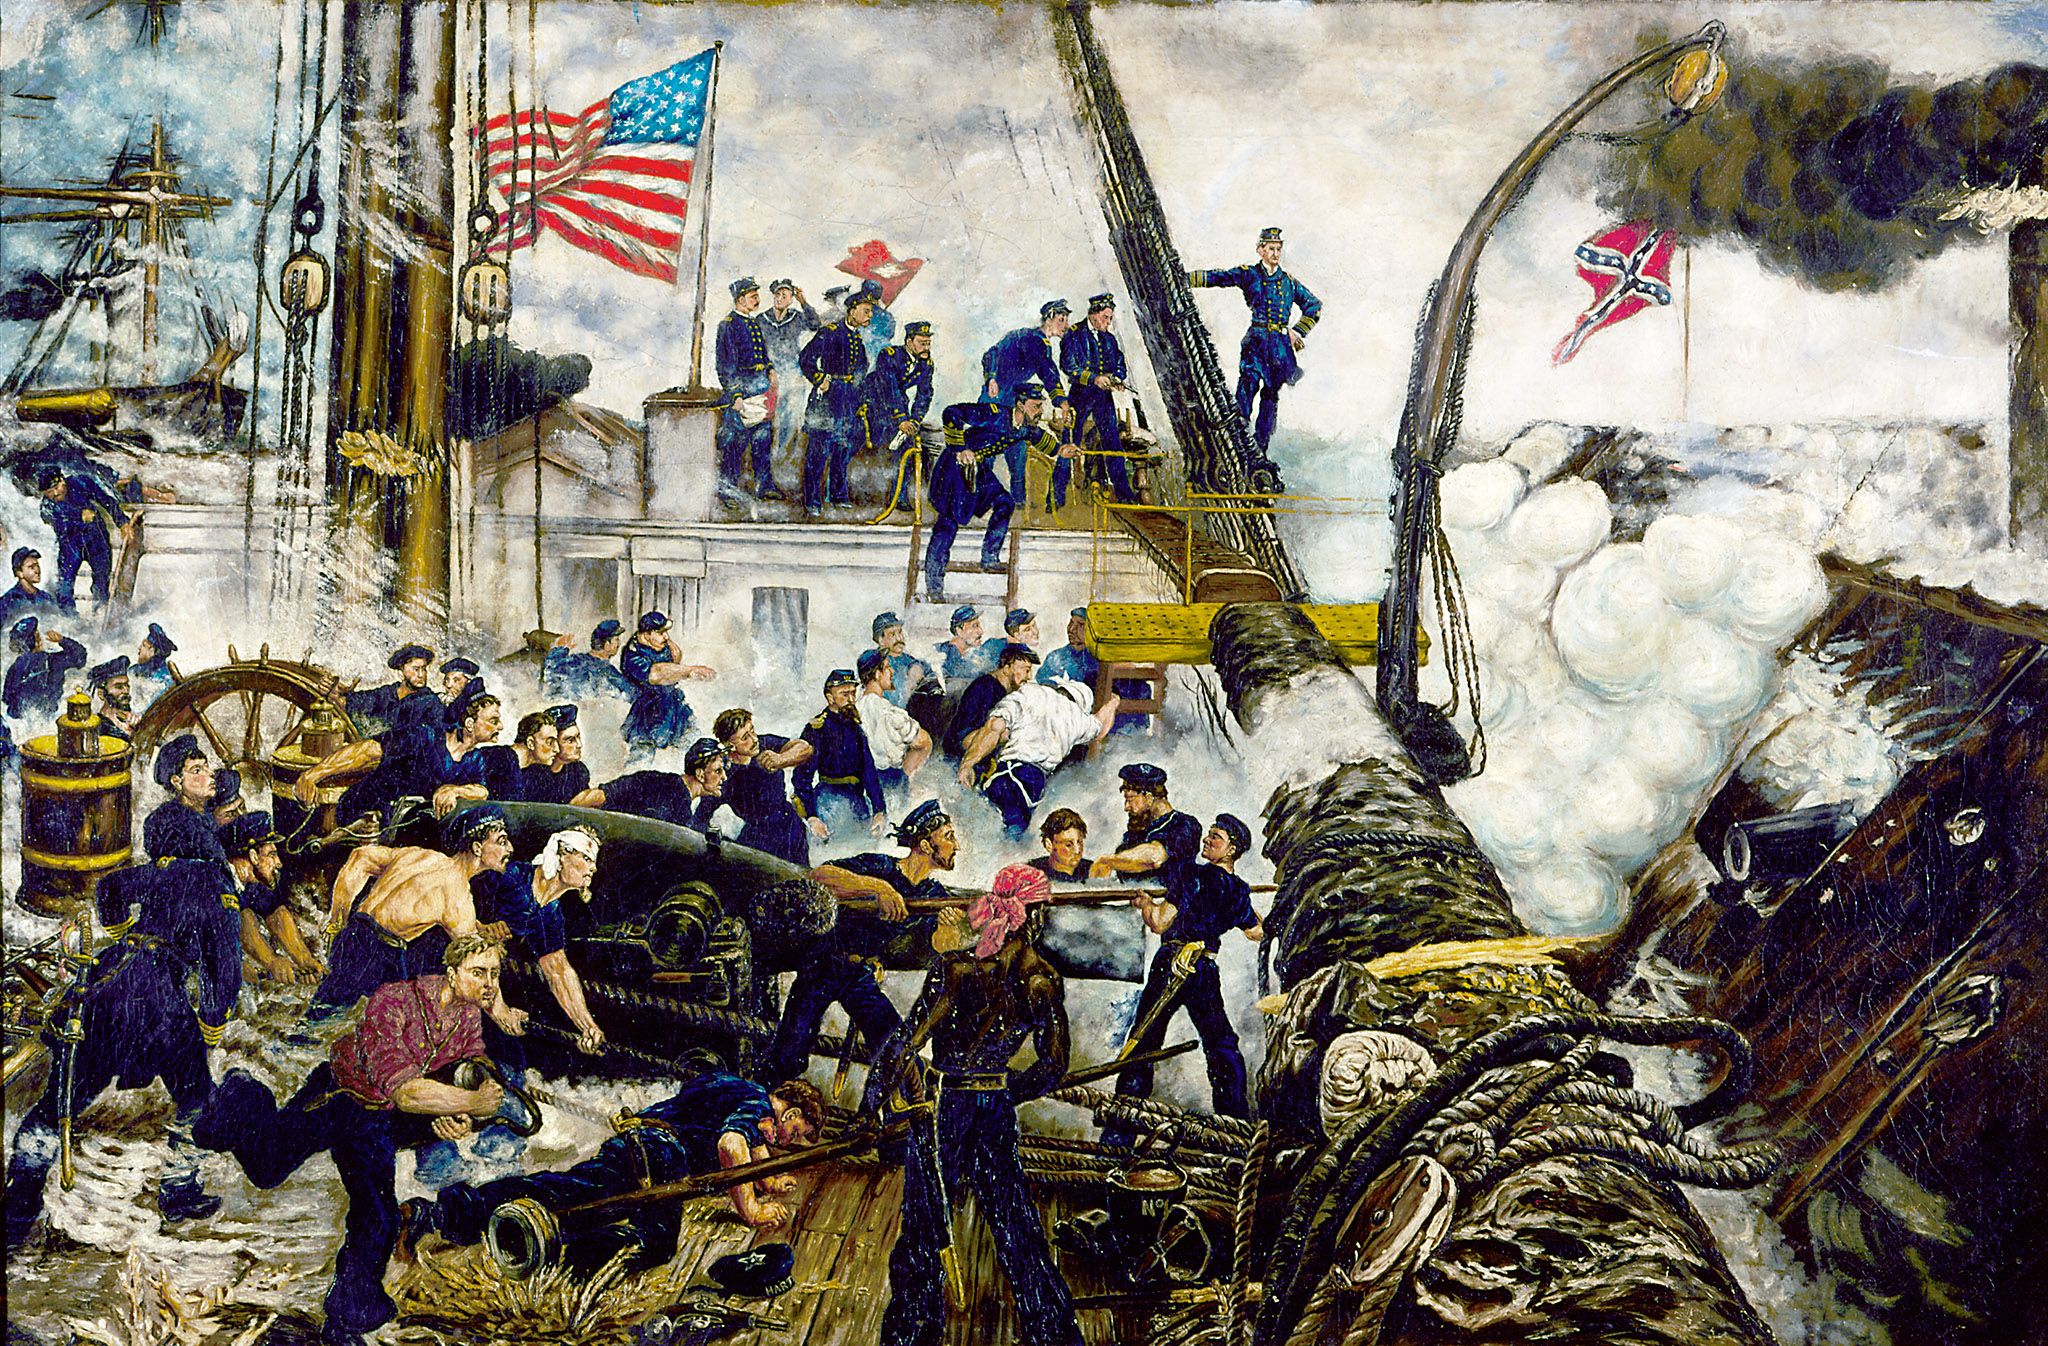 “The Battle of Mobile Bay,” painting, ca. 1884.